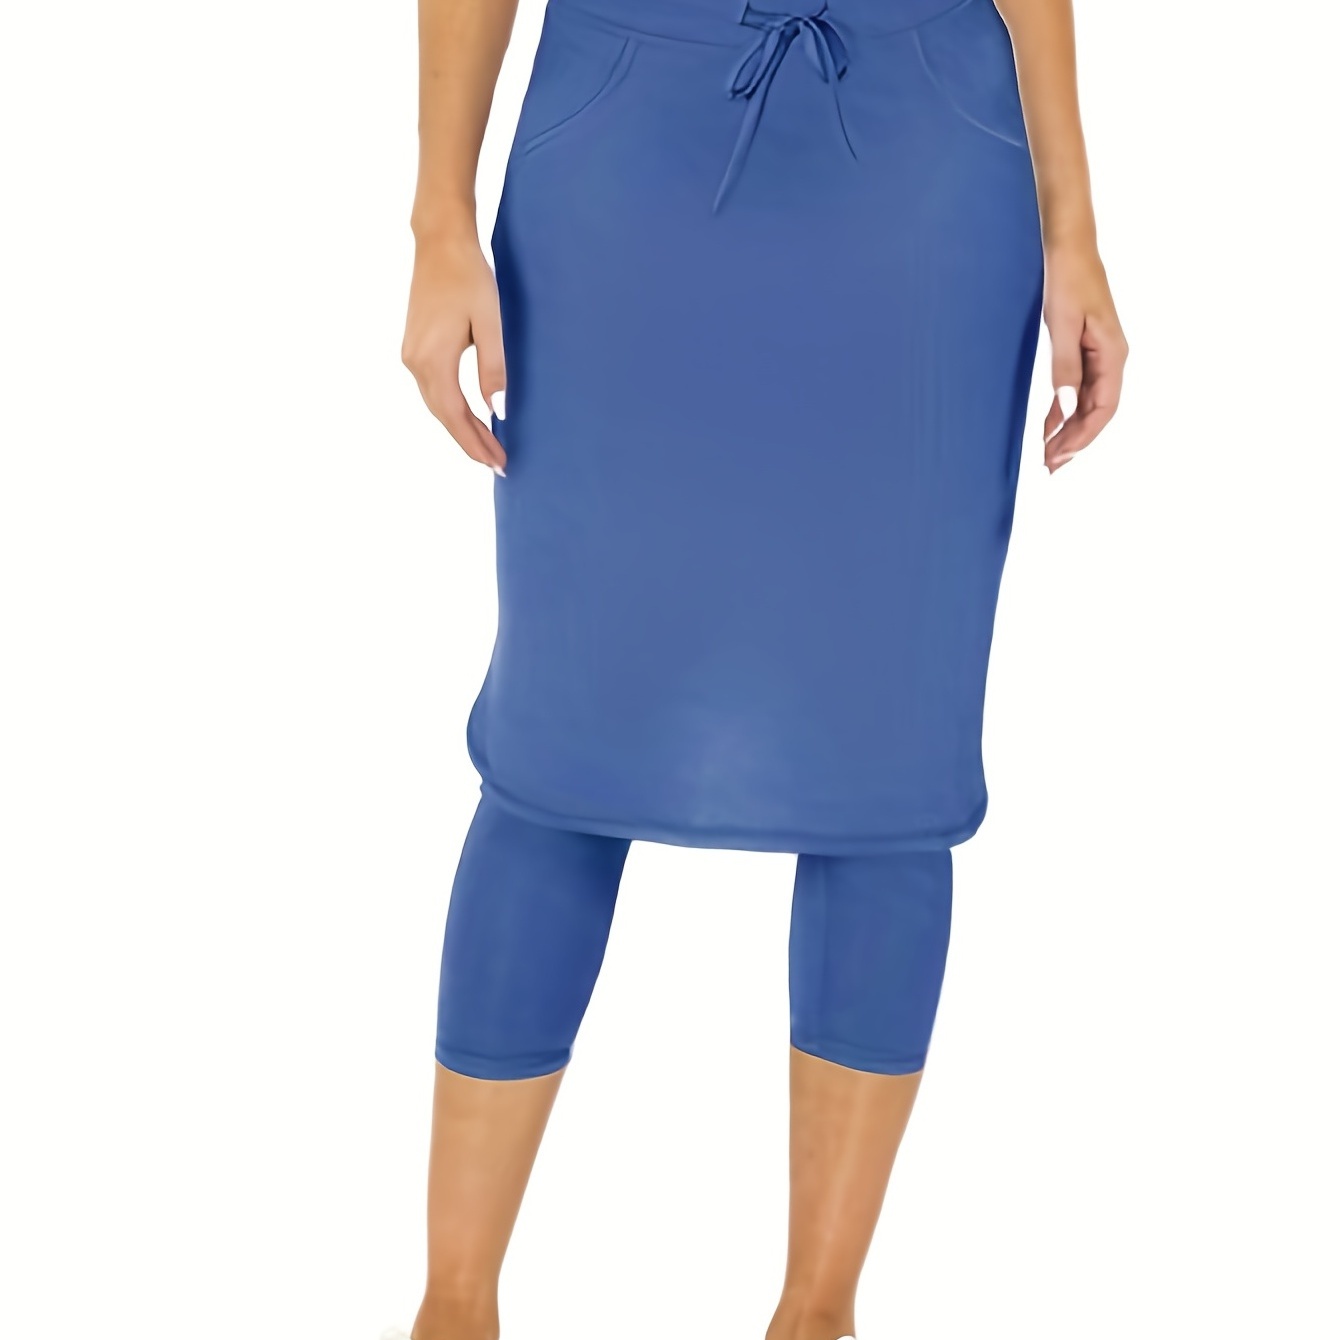 

Women's Blue 2-in-1 Tennis Skirt With Capri Pants - Fashionable Sports Skort With Slant Pockets For Hiking And Golf - Comfortable And Stylish Activewear